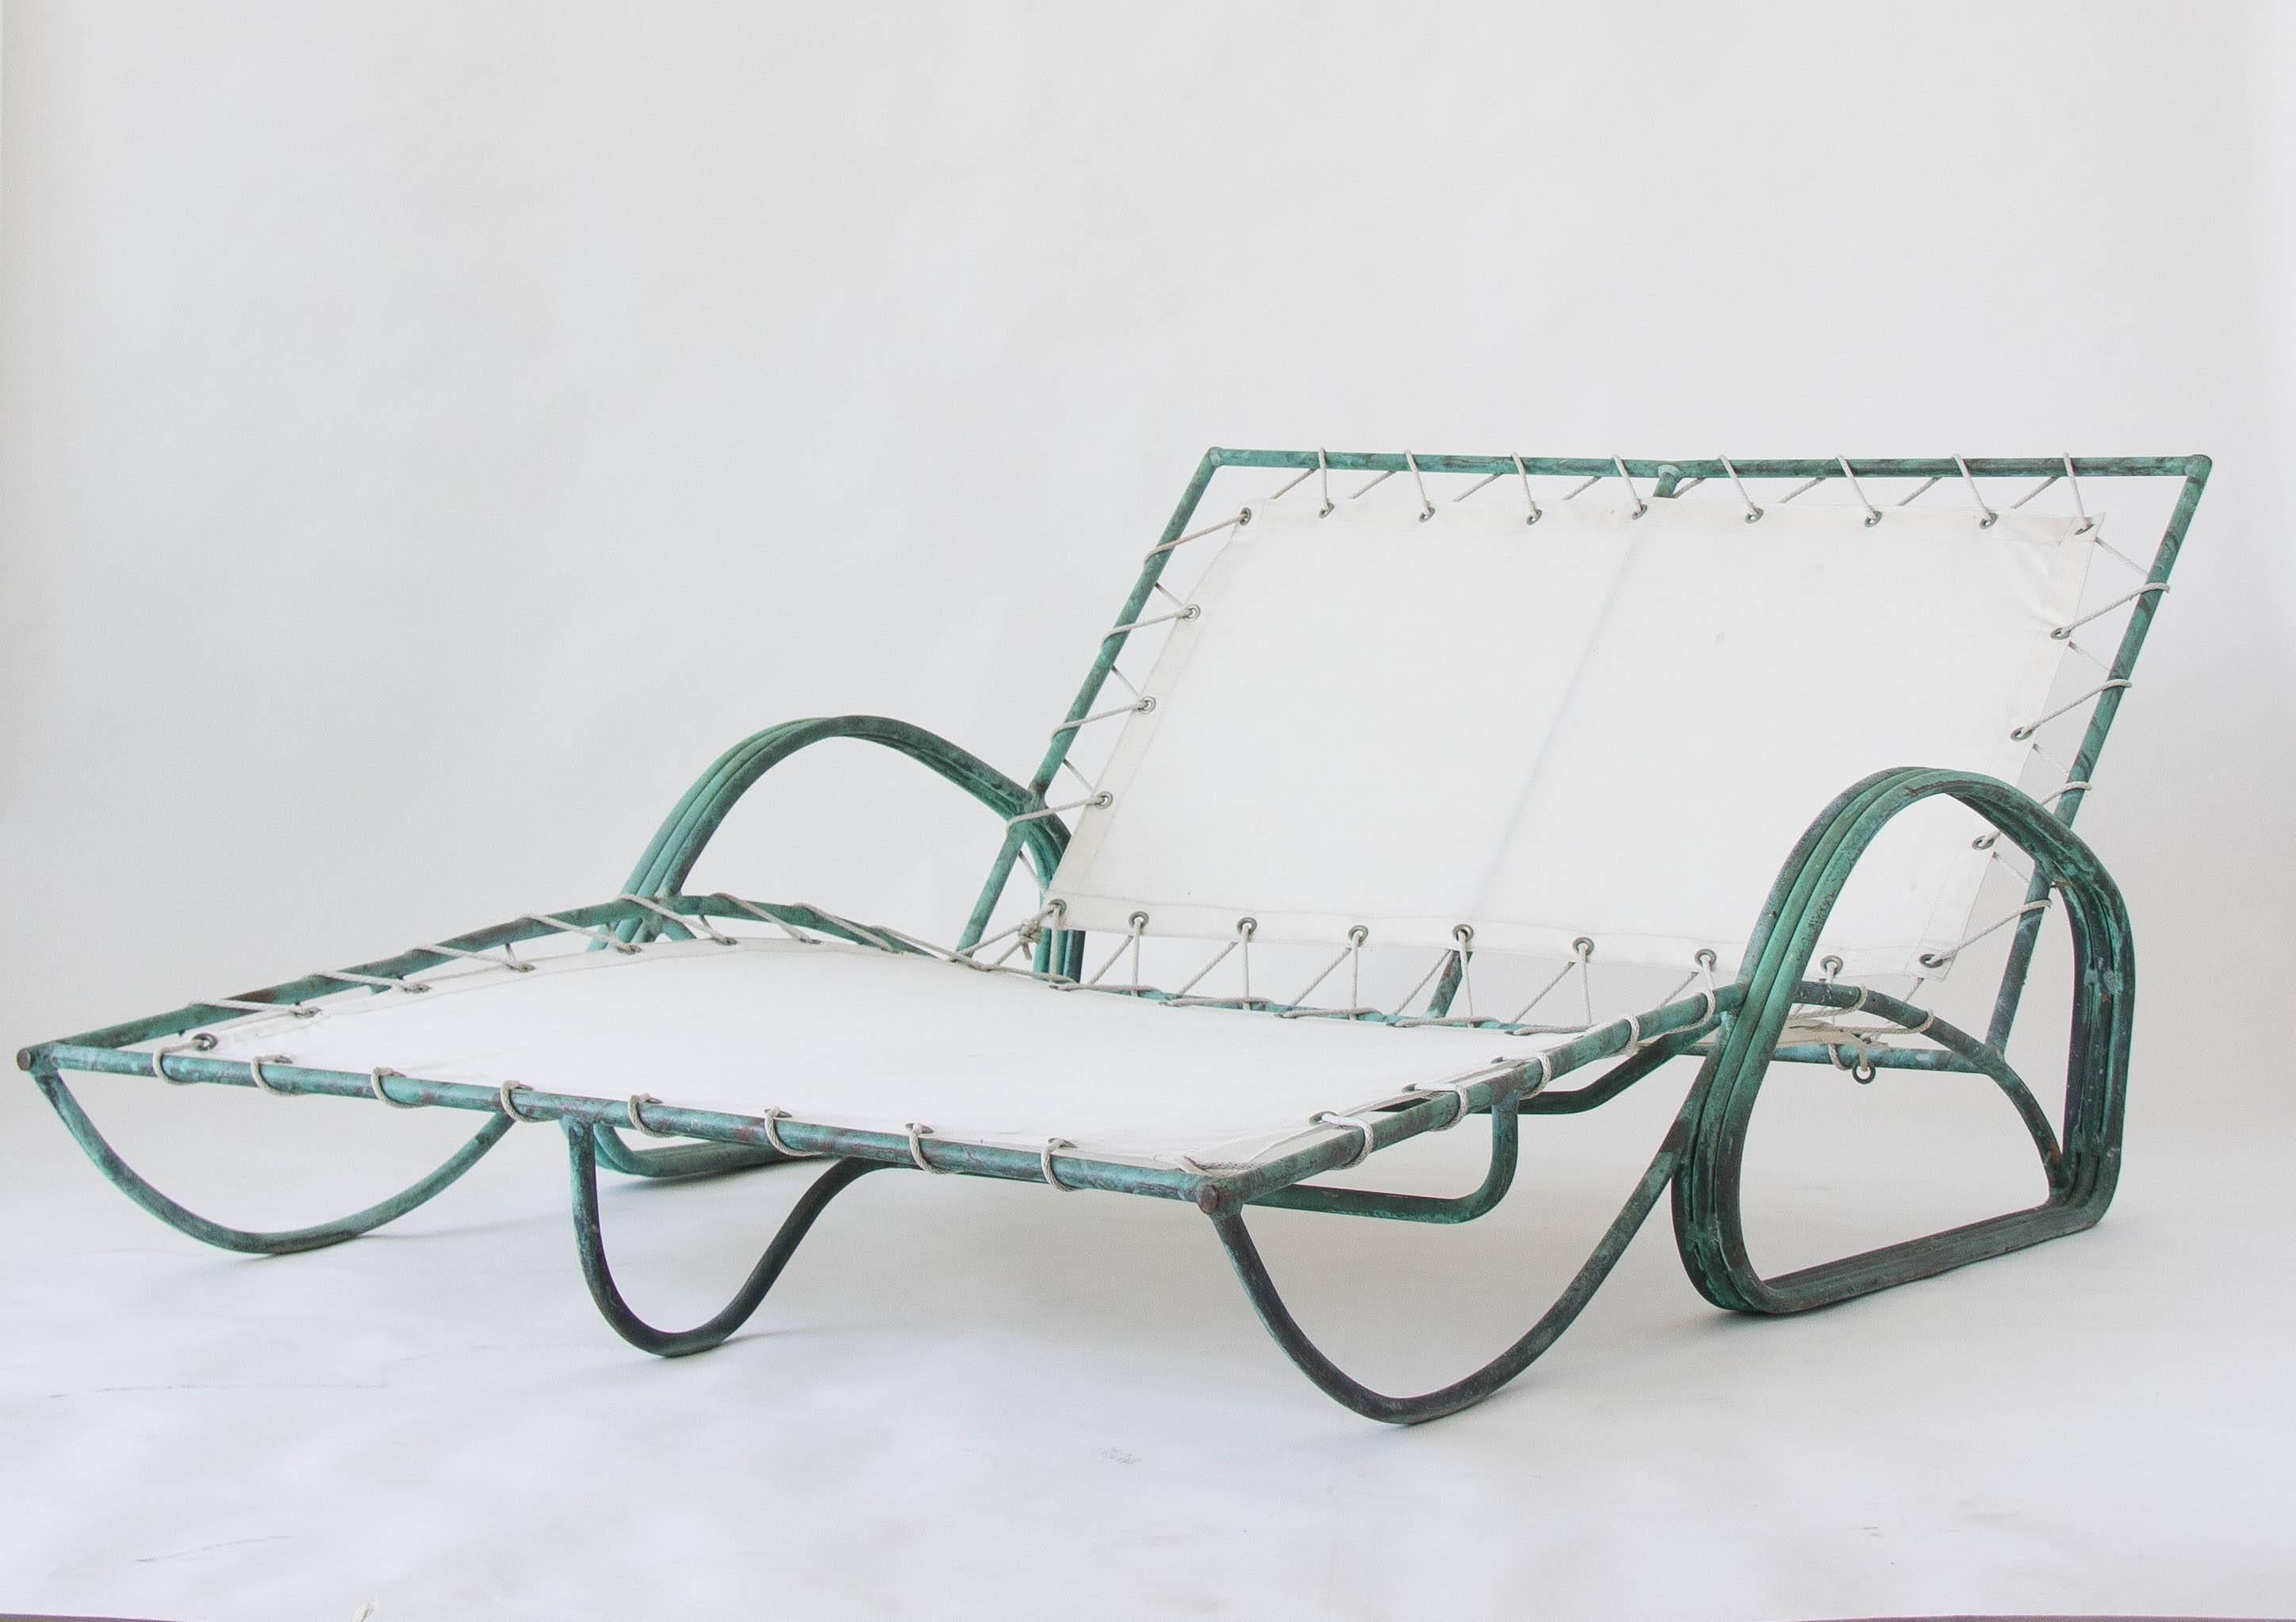 A rare patio chaise longue designed by Walter Lamb and produced by Brown Jordan. The chair has a tubular bronze frame that has oxidized beautifully. A canvas sling is laced to the frame with nylon rope. Three rows of tubular bronze join to form the